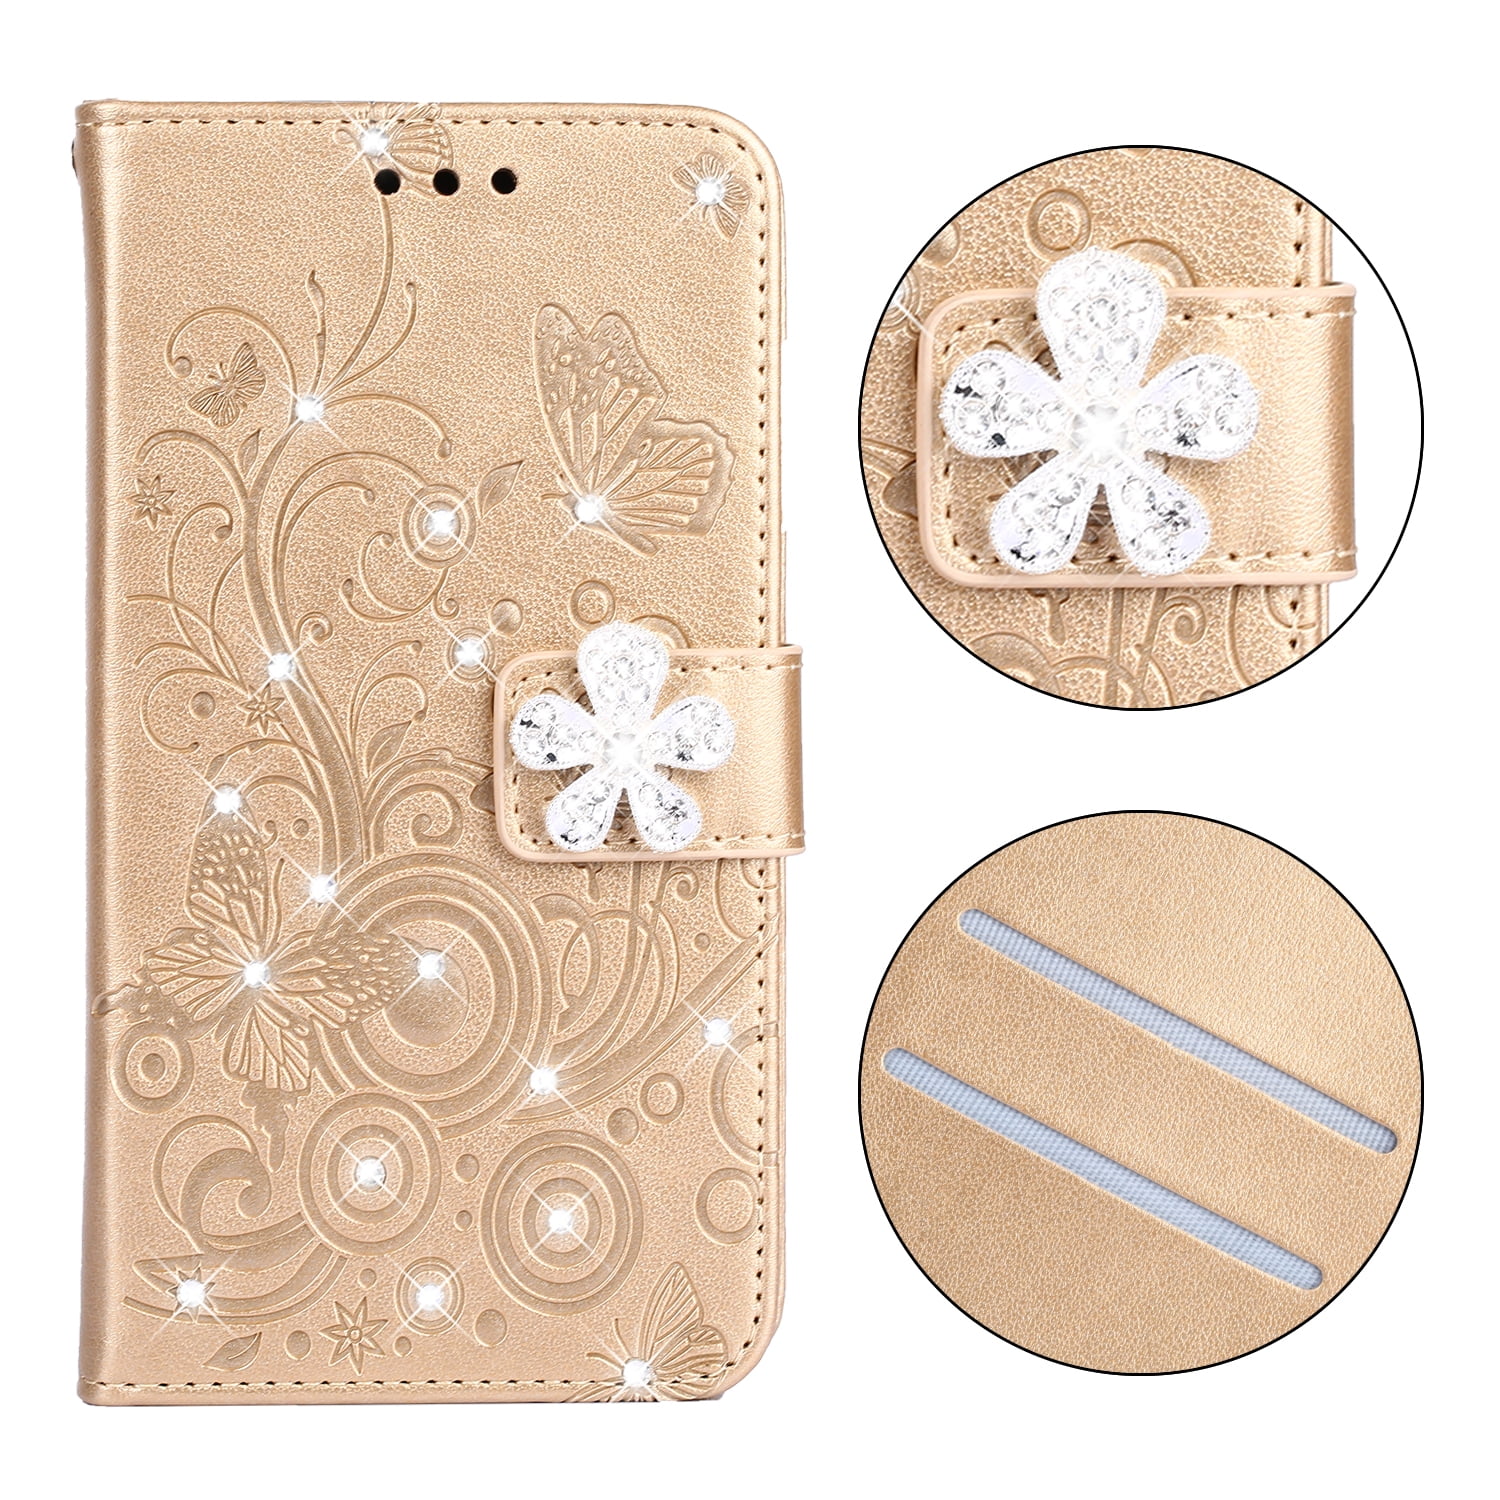 JAWSEU Case Flip Compatible with Samsung Galaxy J6 2018 PU Leather Wallet Folio Stand Full Body Case 3D Bling Glitter Butterfly Cute Love Pattern with Card Holder Magnetic Closure Cover,Blue